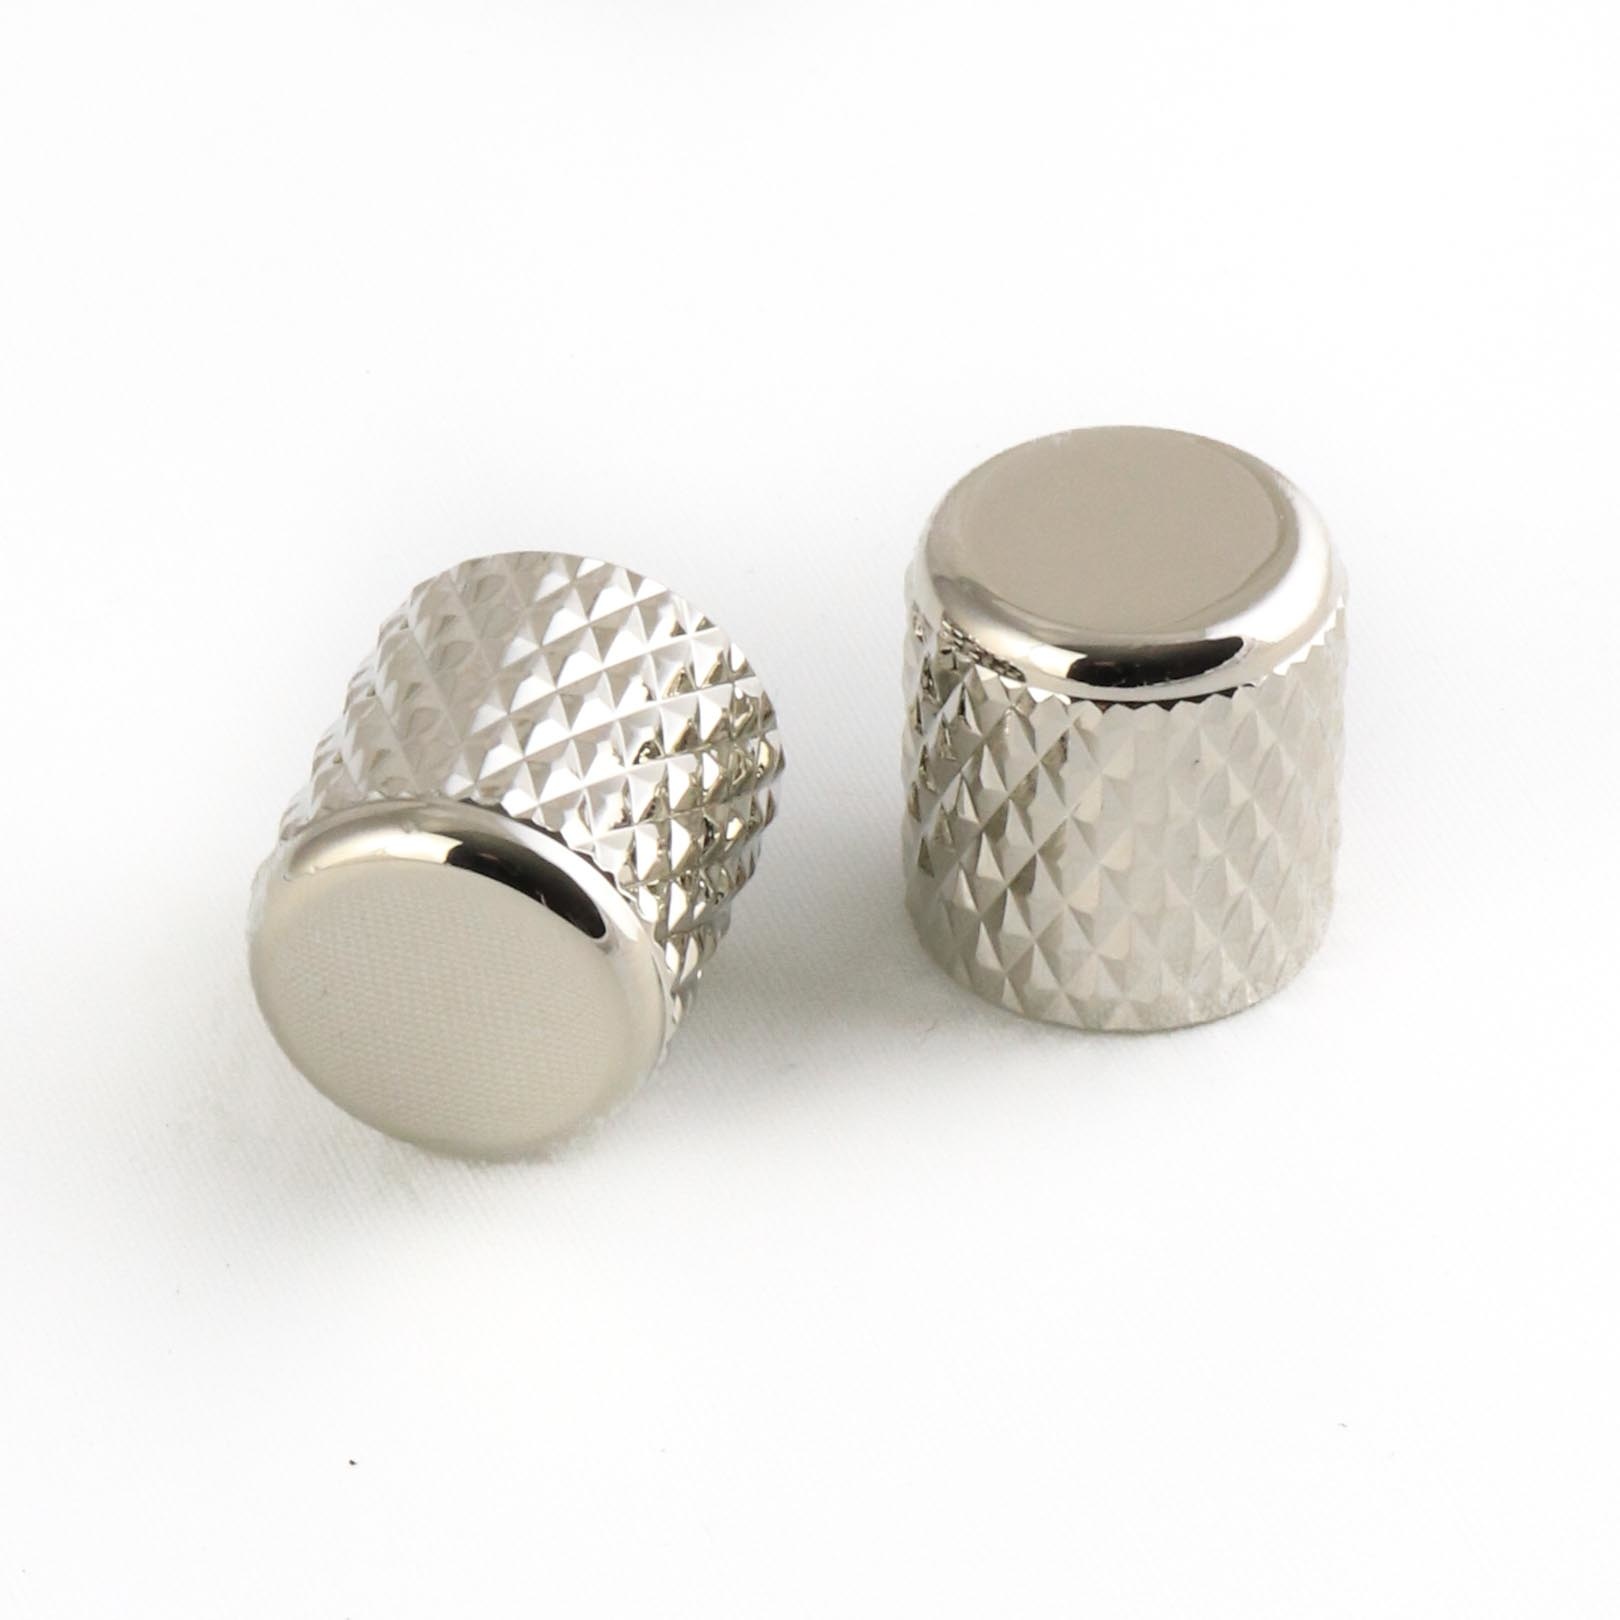 MannMade USA MannMade USA Coarse Knurled Flat Top Knob - Nickel - Set of 2